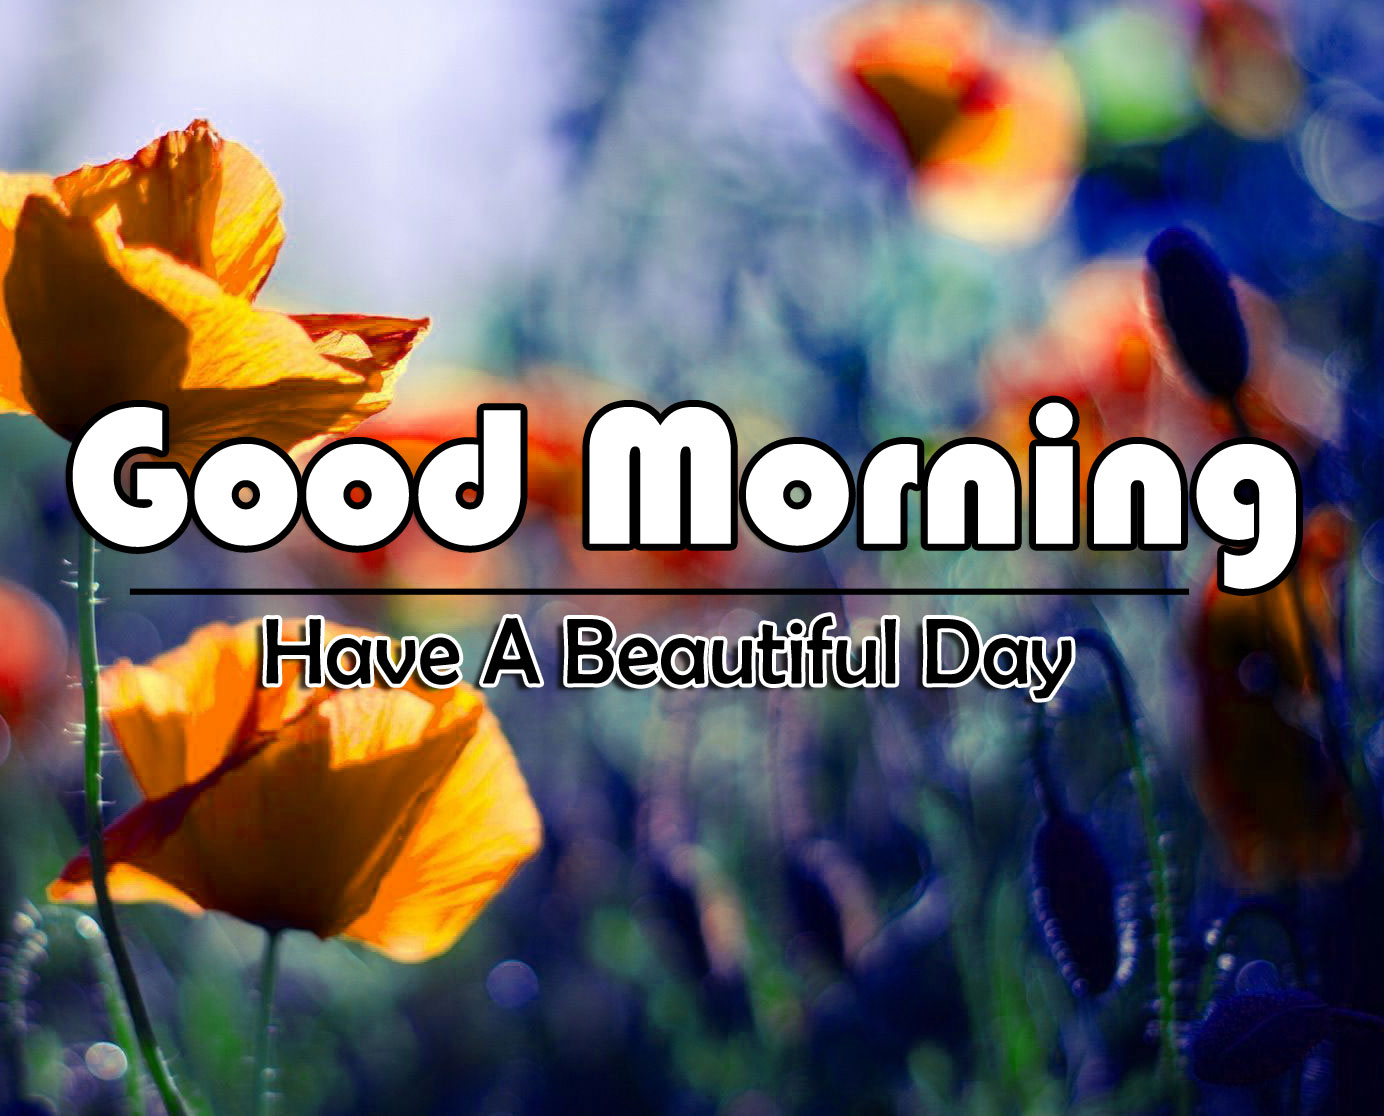 New Good Morning 4k Full HD Images Download For Daily ...